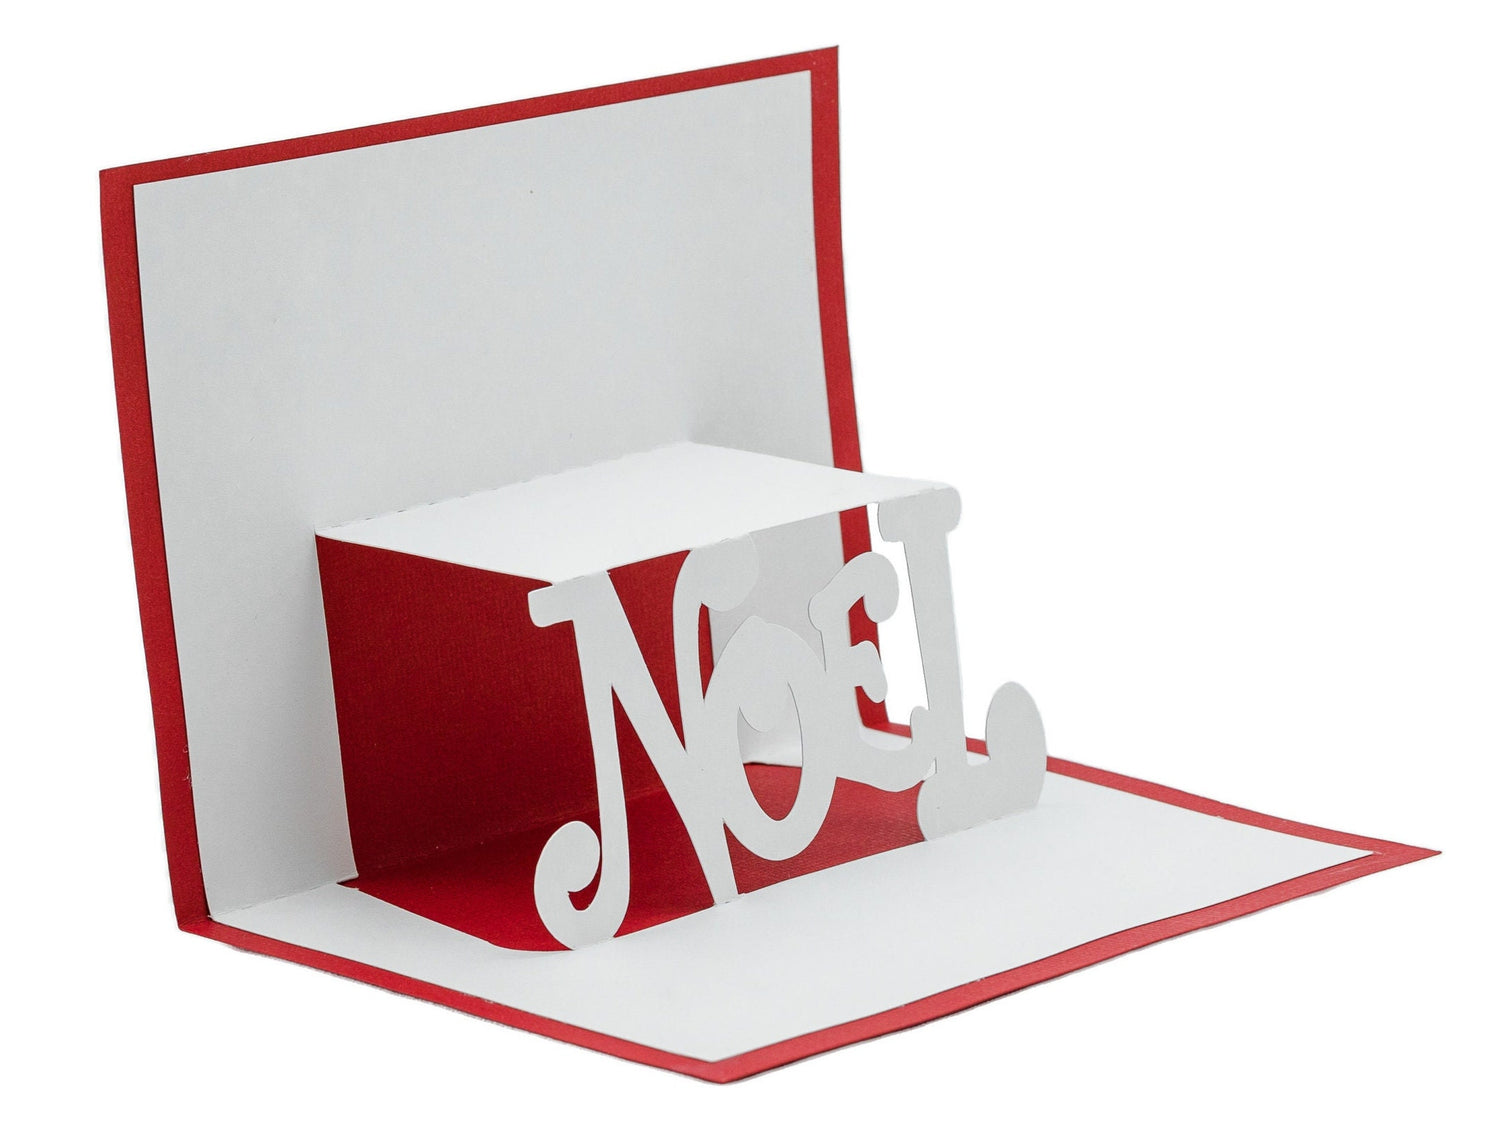 Noel Minimalist Christmas Pop Up 3D Greeting Card | Modern Style Holiday Card | Unique Holiday Decorations | Handmade Christmas Gift